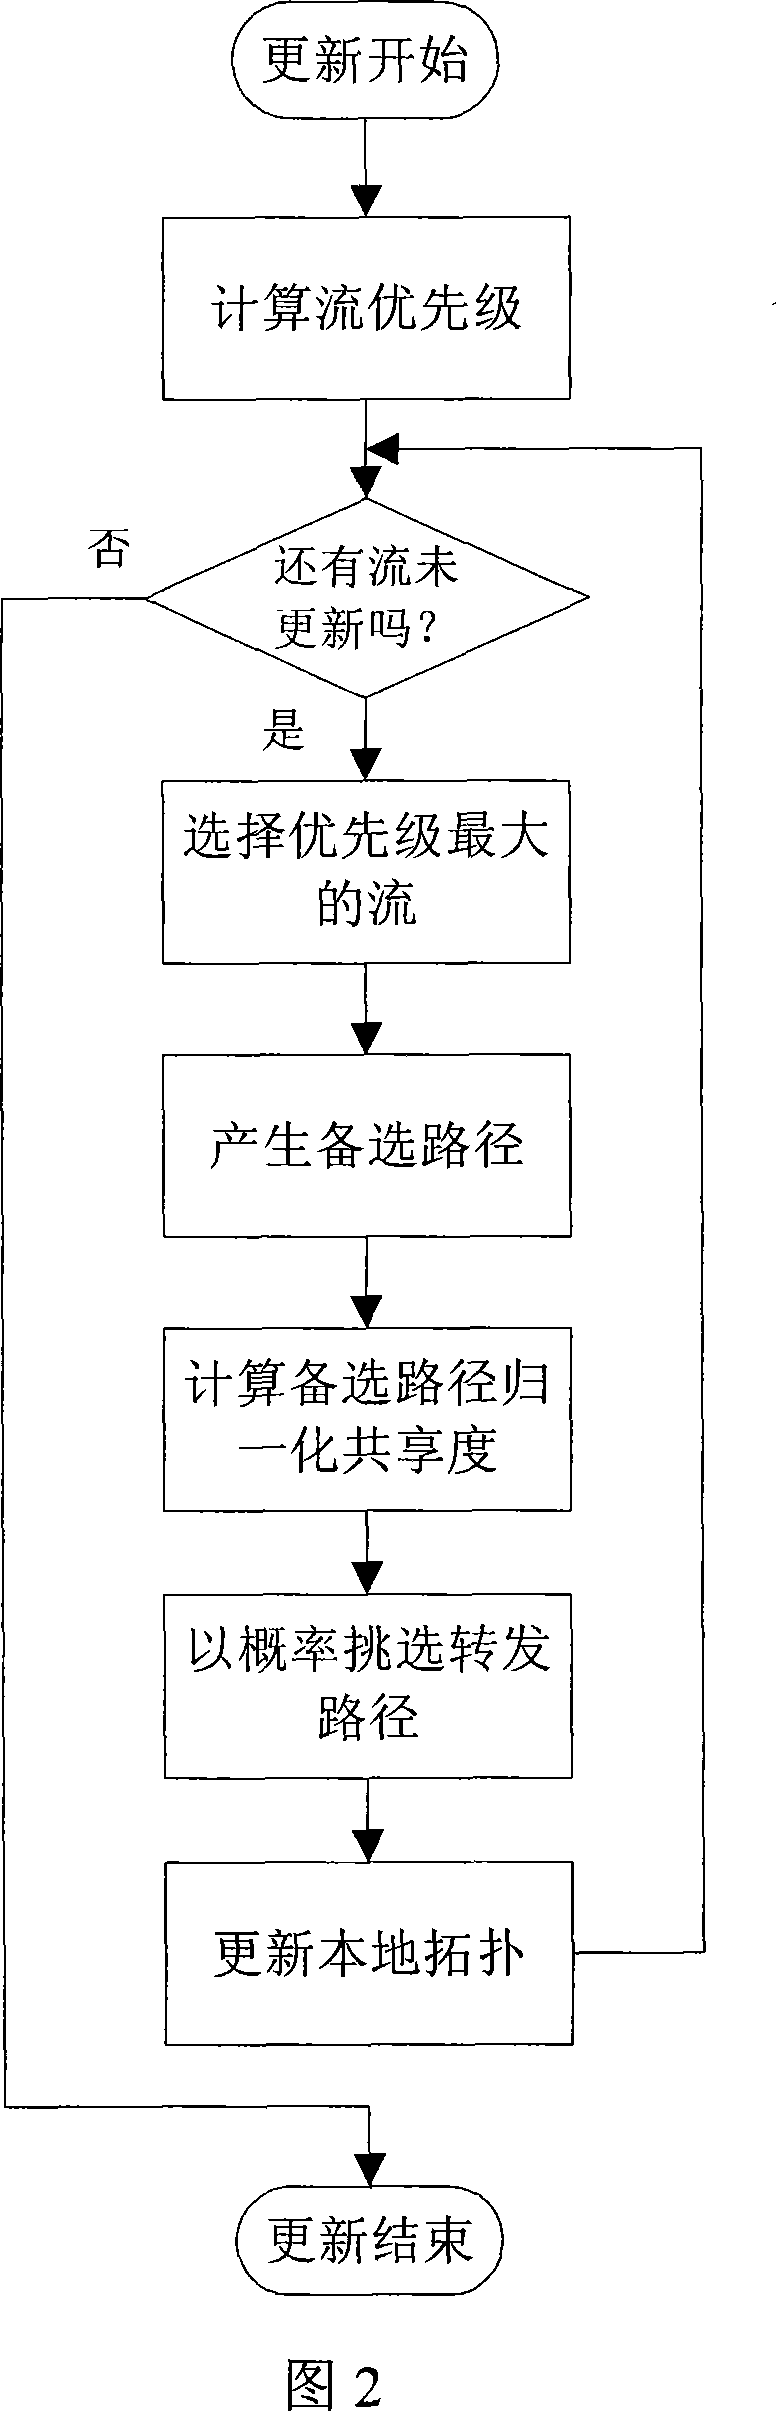 Method to suppress route flapping in service bearing network